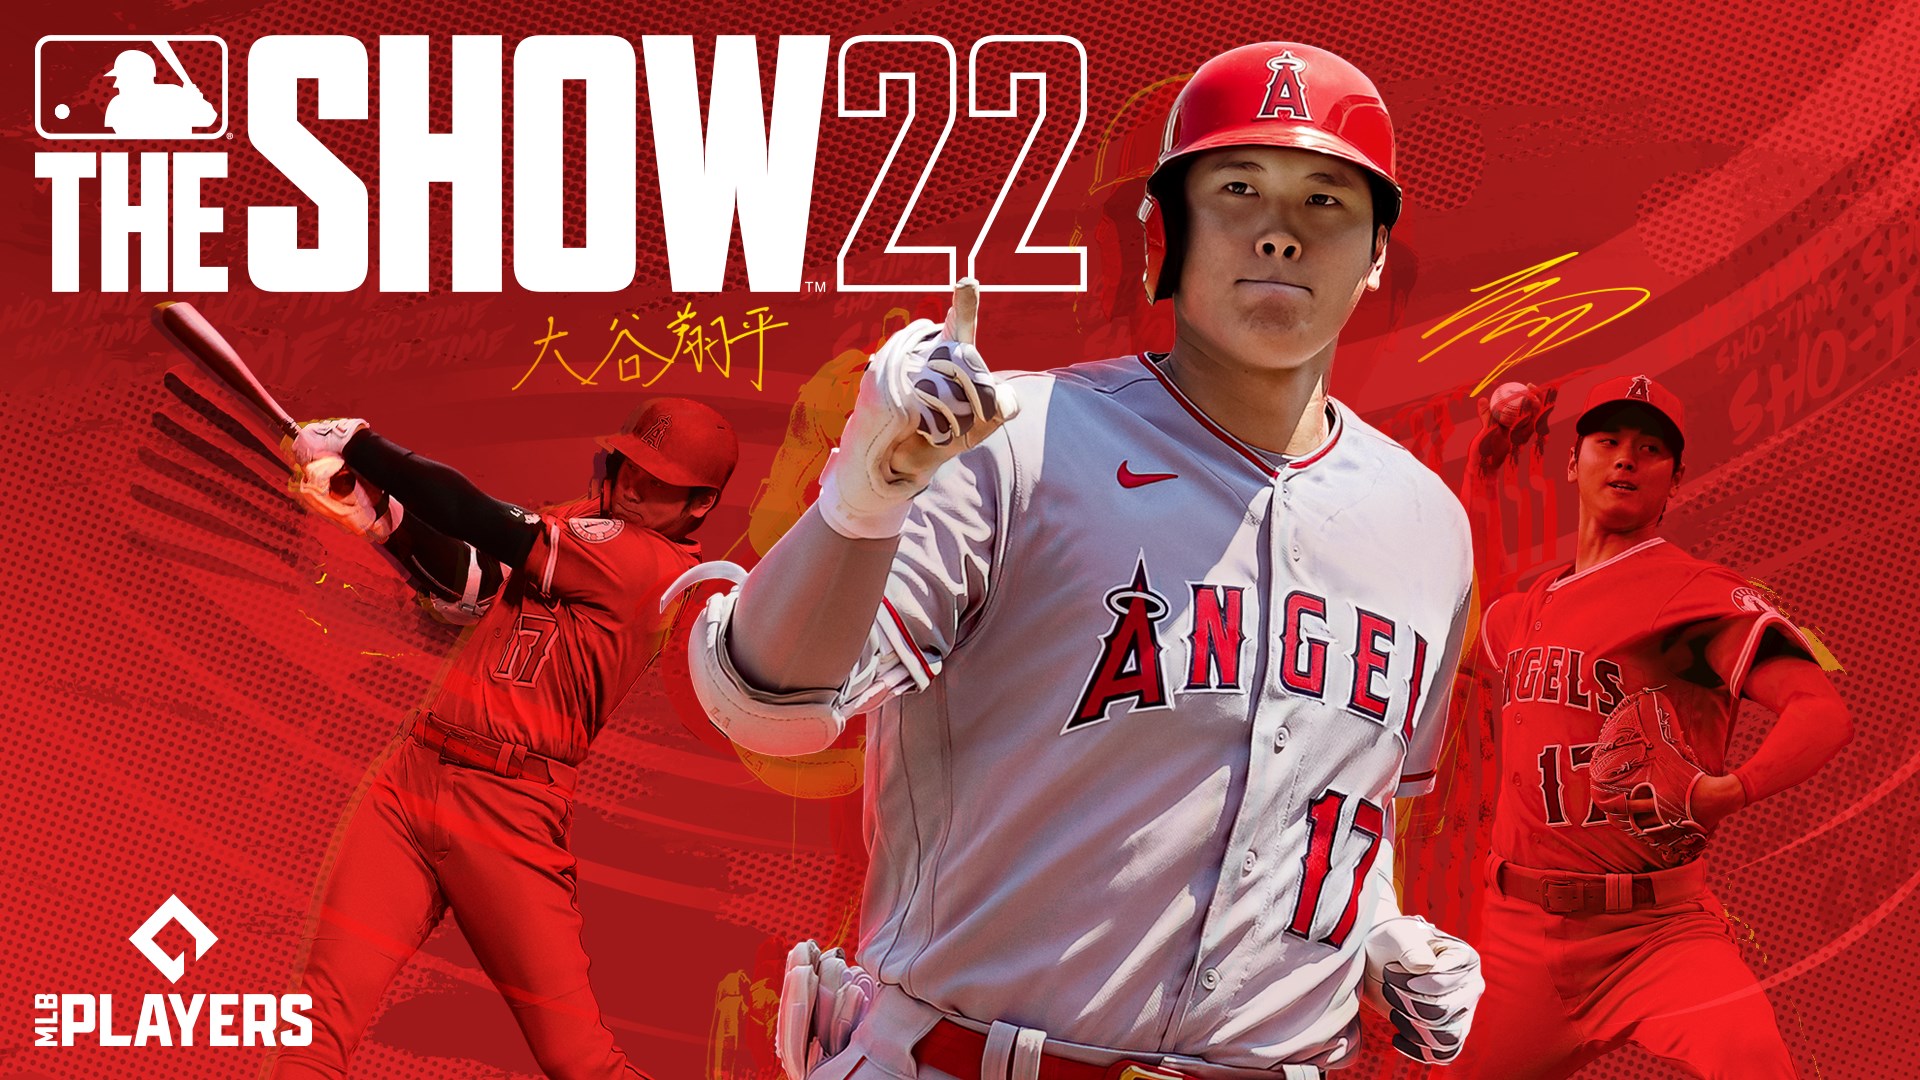 MLB The Show 22 Is Now Available For Digital Pre-order And Pre-download On Xbox One And Xbox Series X|S